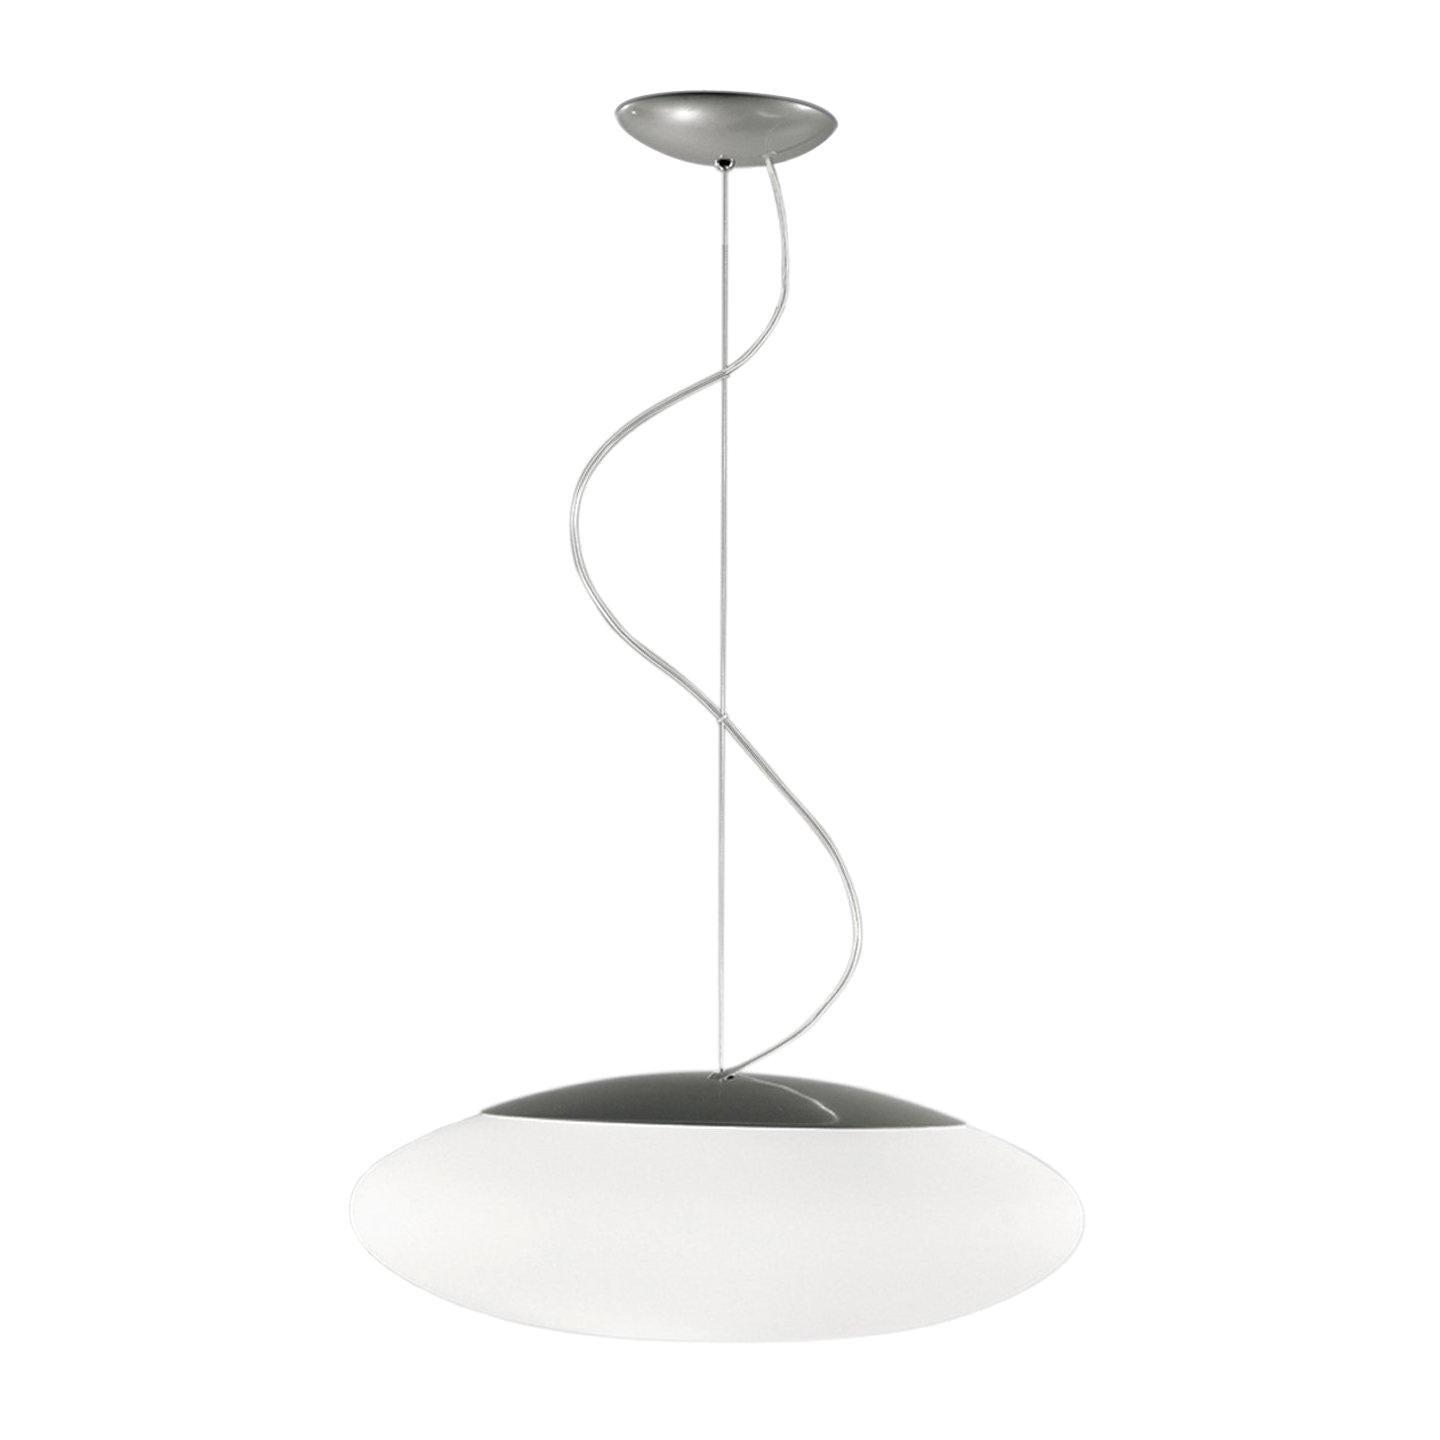 Leucos Felix S 55 Pendant Light in Satin White and Gray by Design Lab For Sale